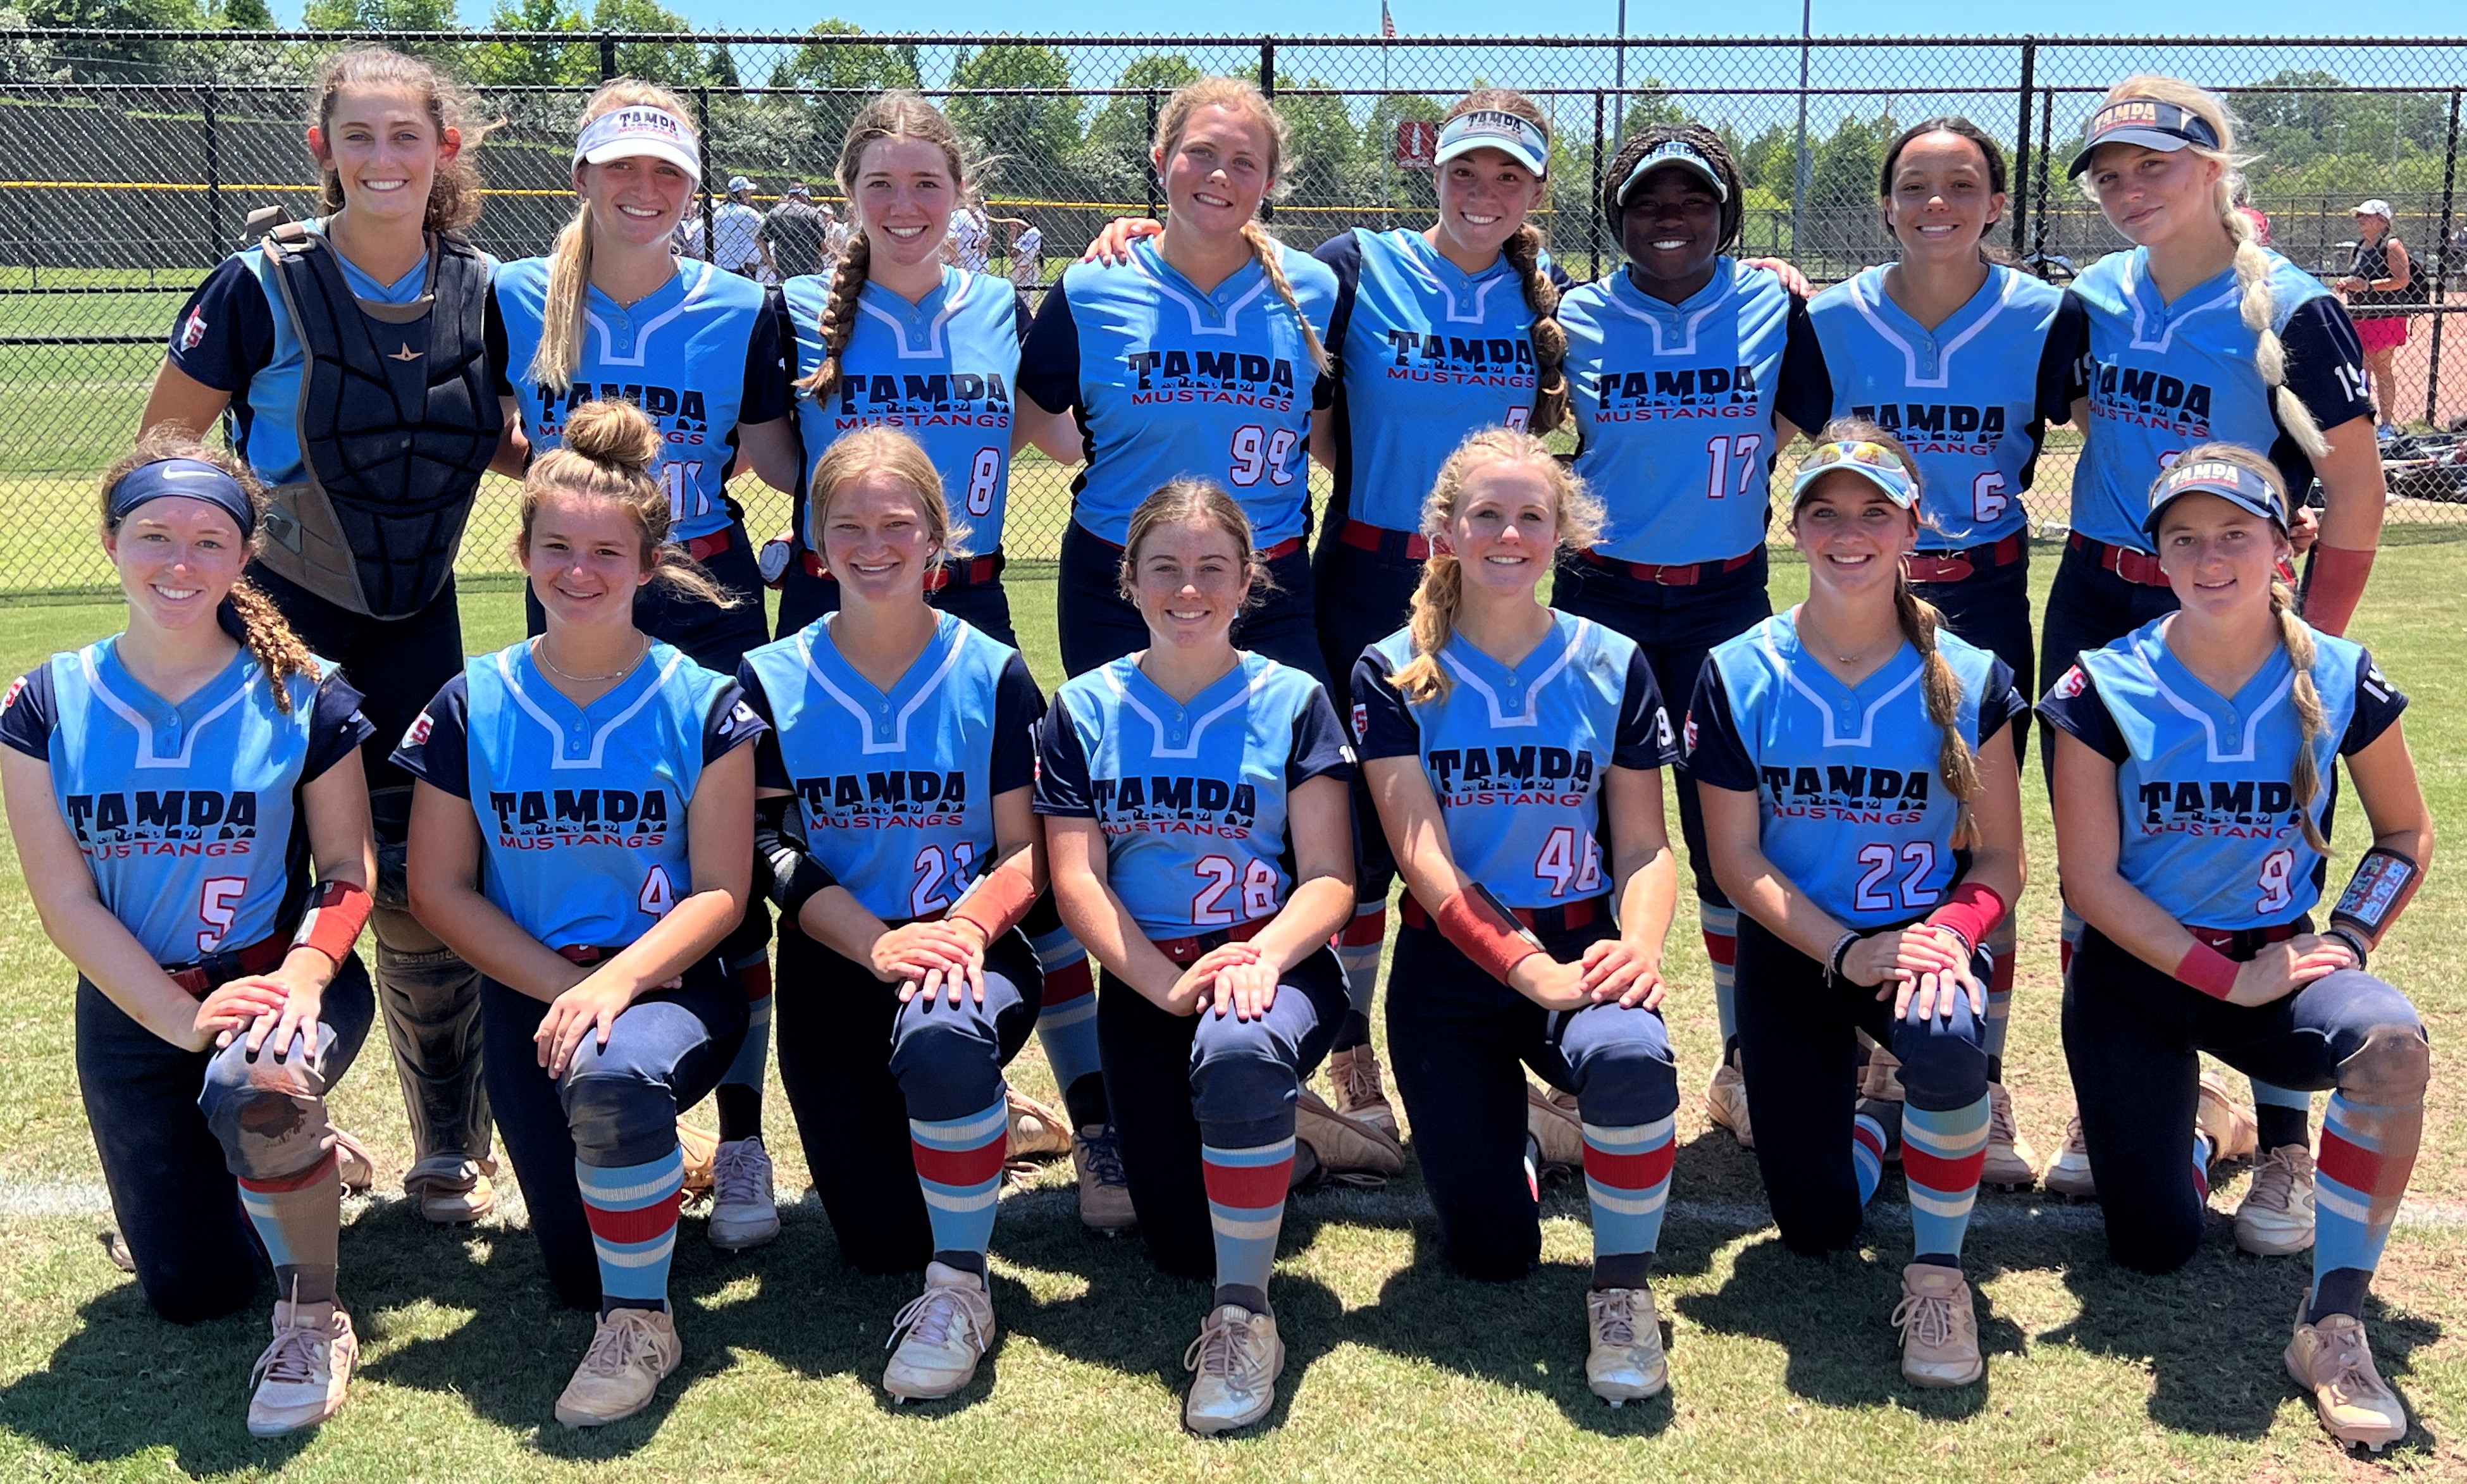 Tampa Mustangs Ray Finishes 2nd in Pool A at T-Bolts 5 Star Showcase